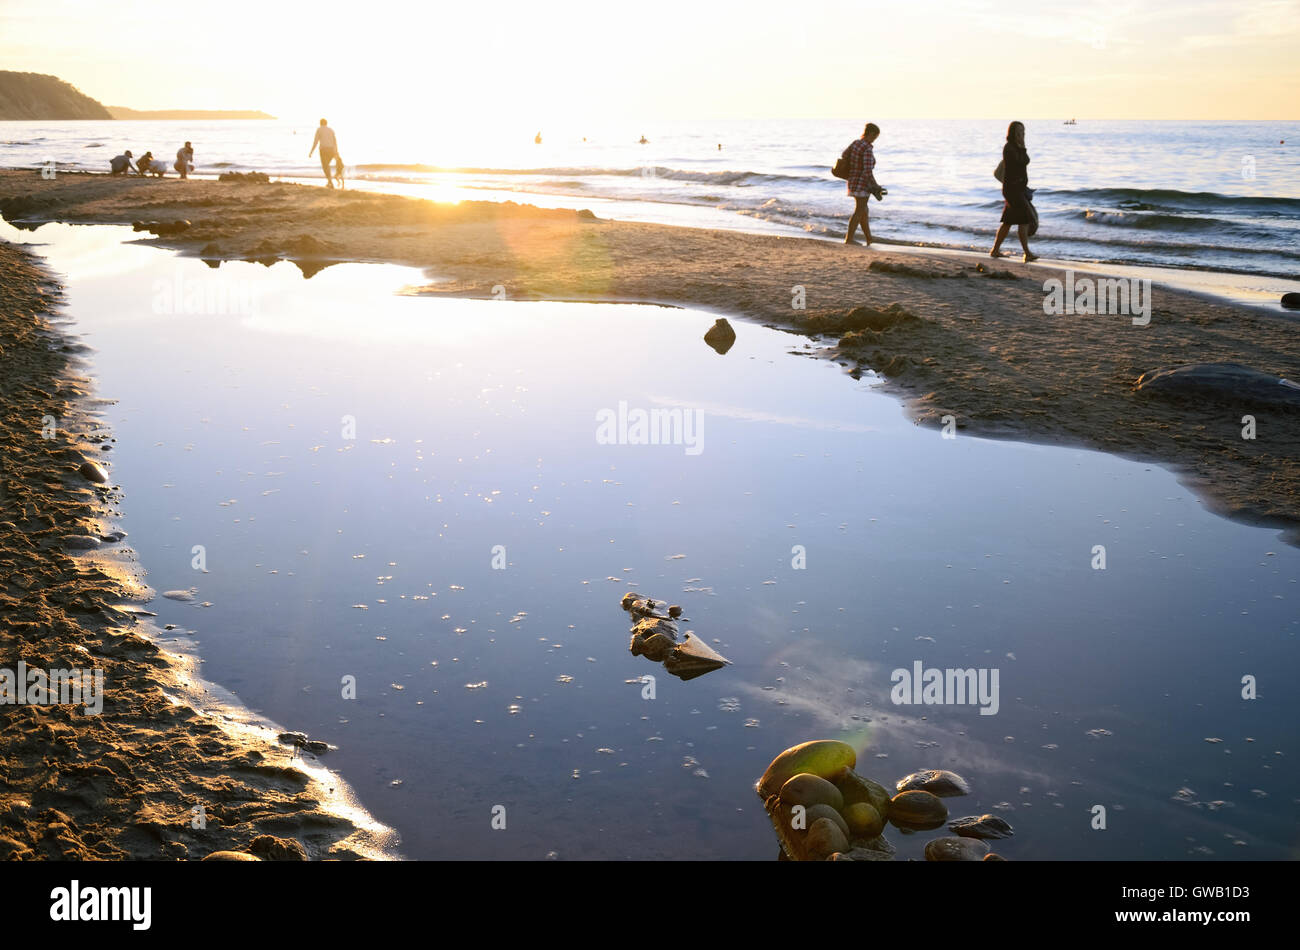 People Having a Rest on the Beach and Strolling along the Edge of a Sea at Summer Sunset (Photo Taken at the Baltic Sea) Stock Photo